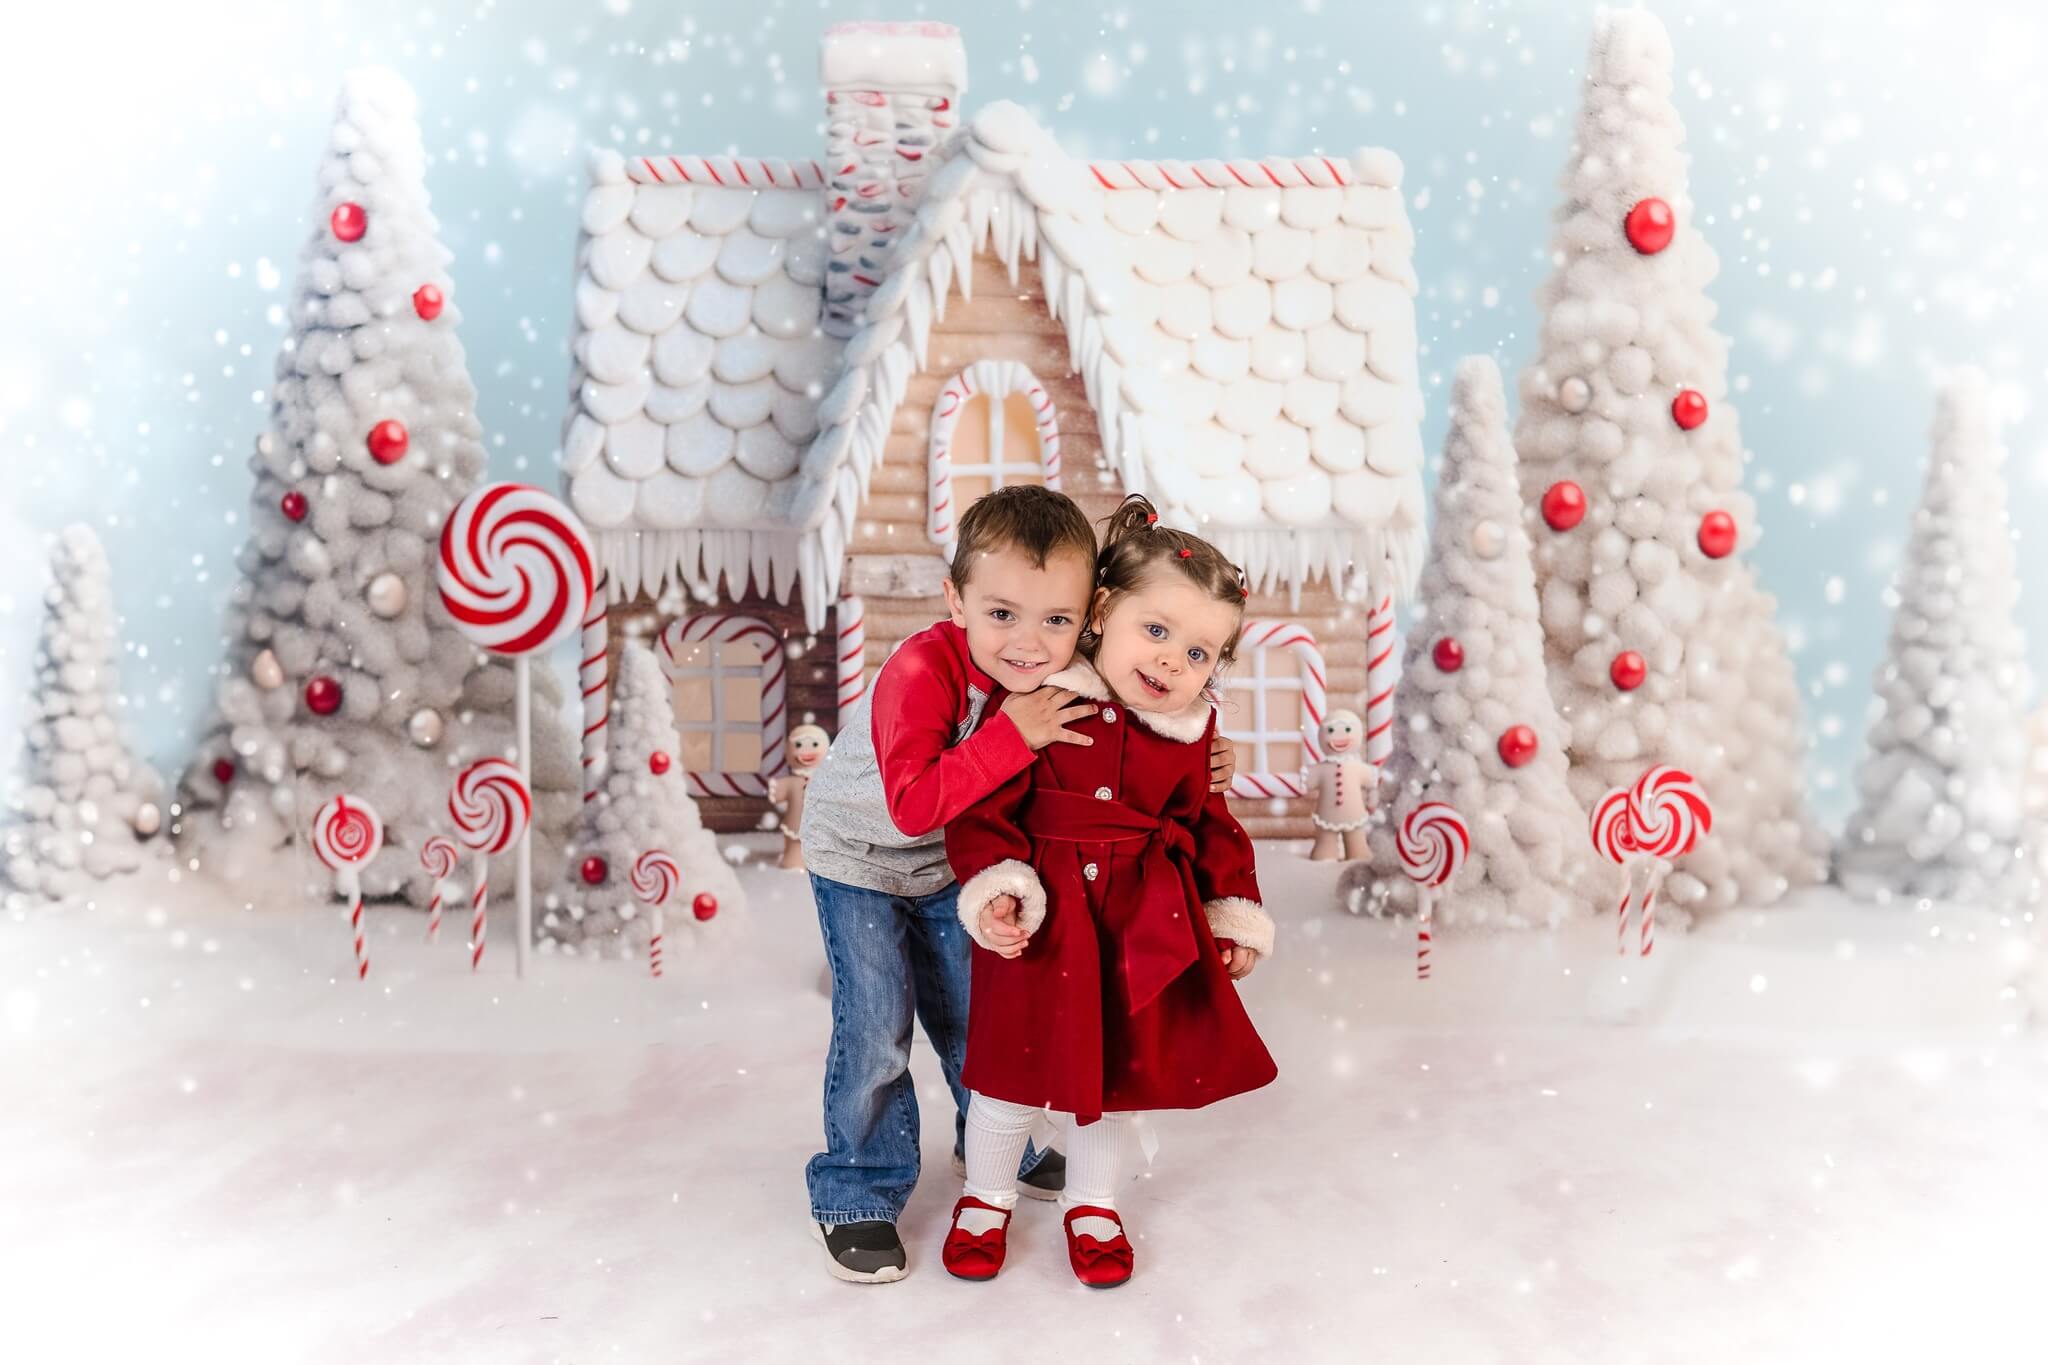 Kate Christmas Candy Backdrop Snow House+White Winter Snow Floor Backdrop for Photography